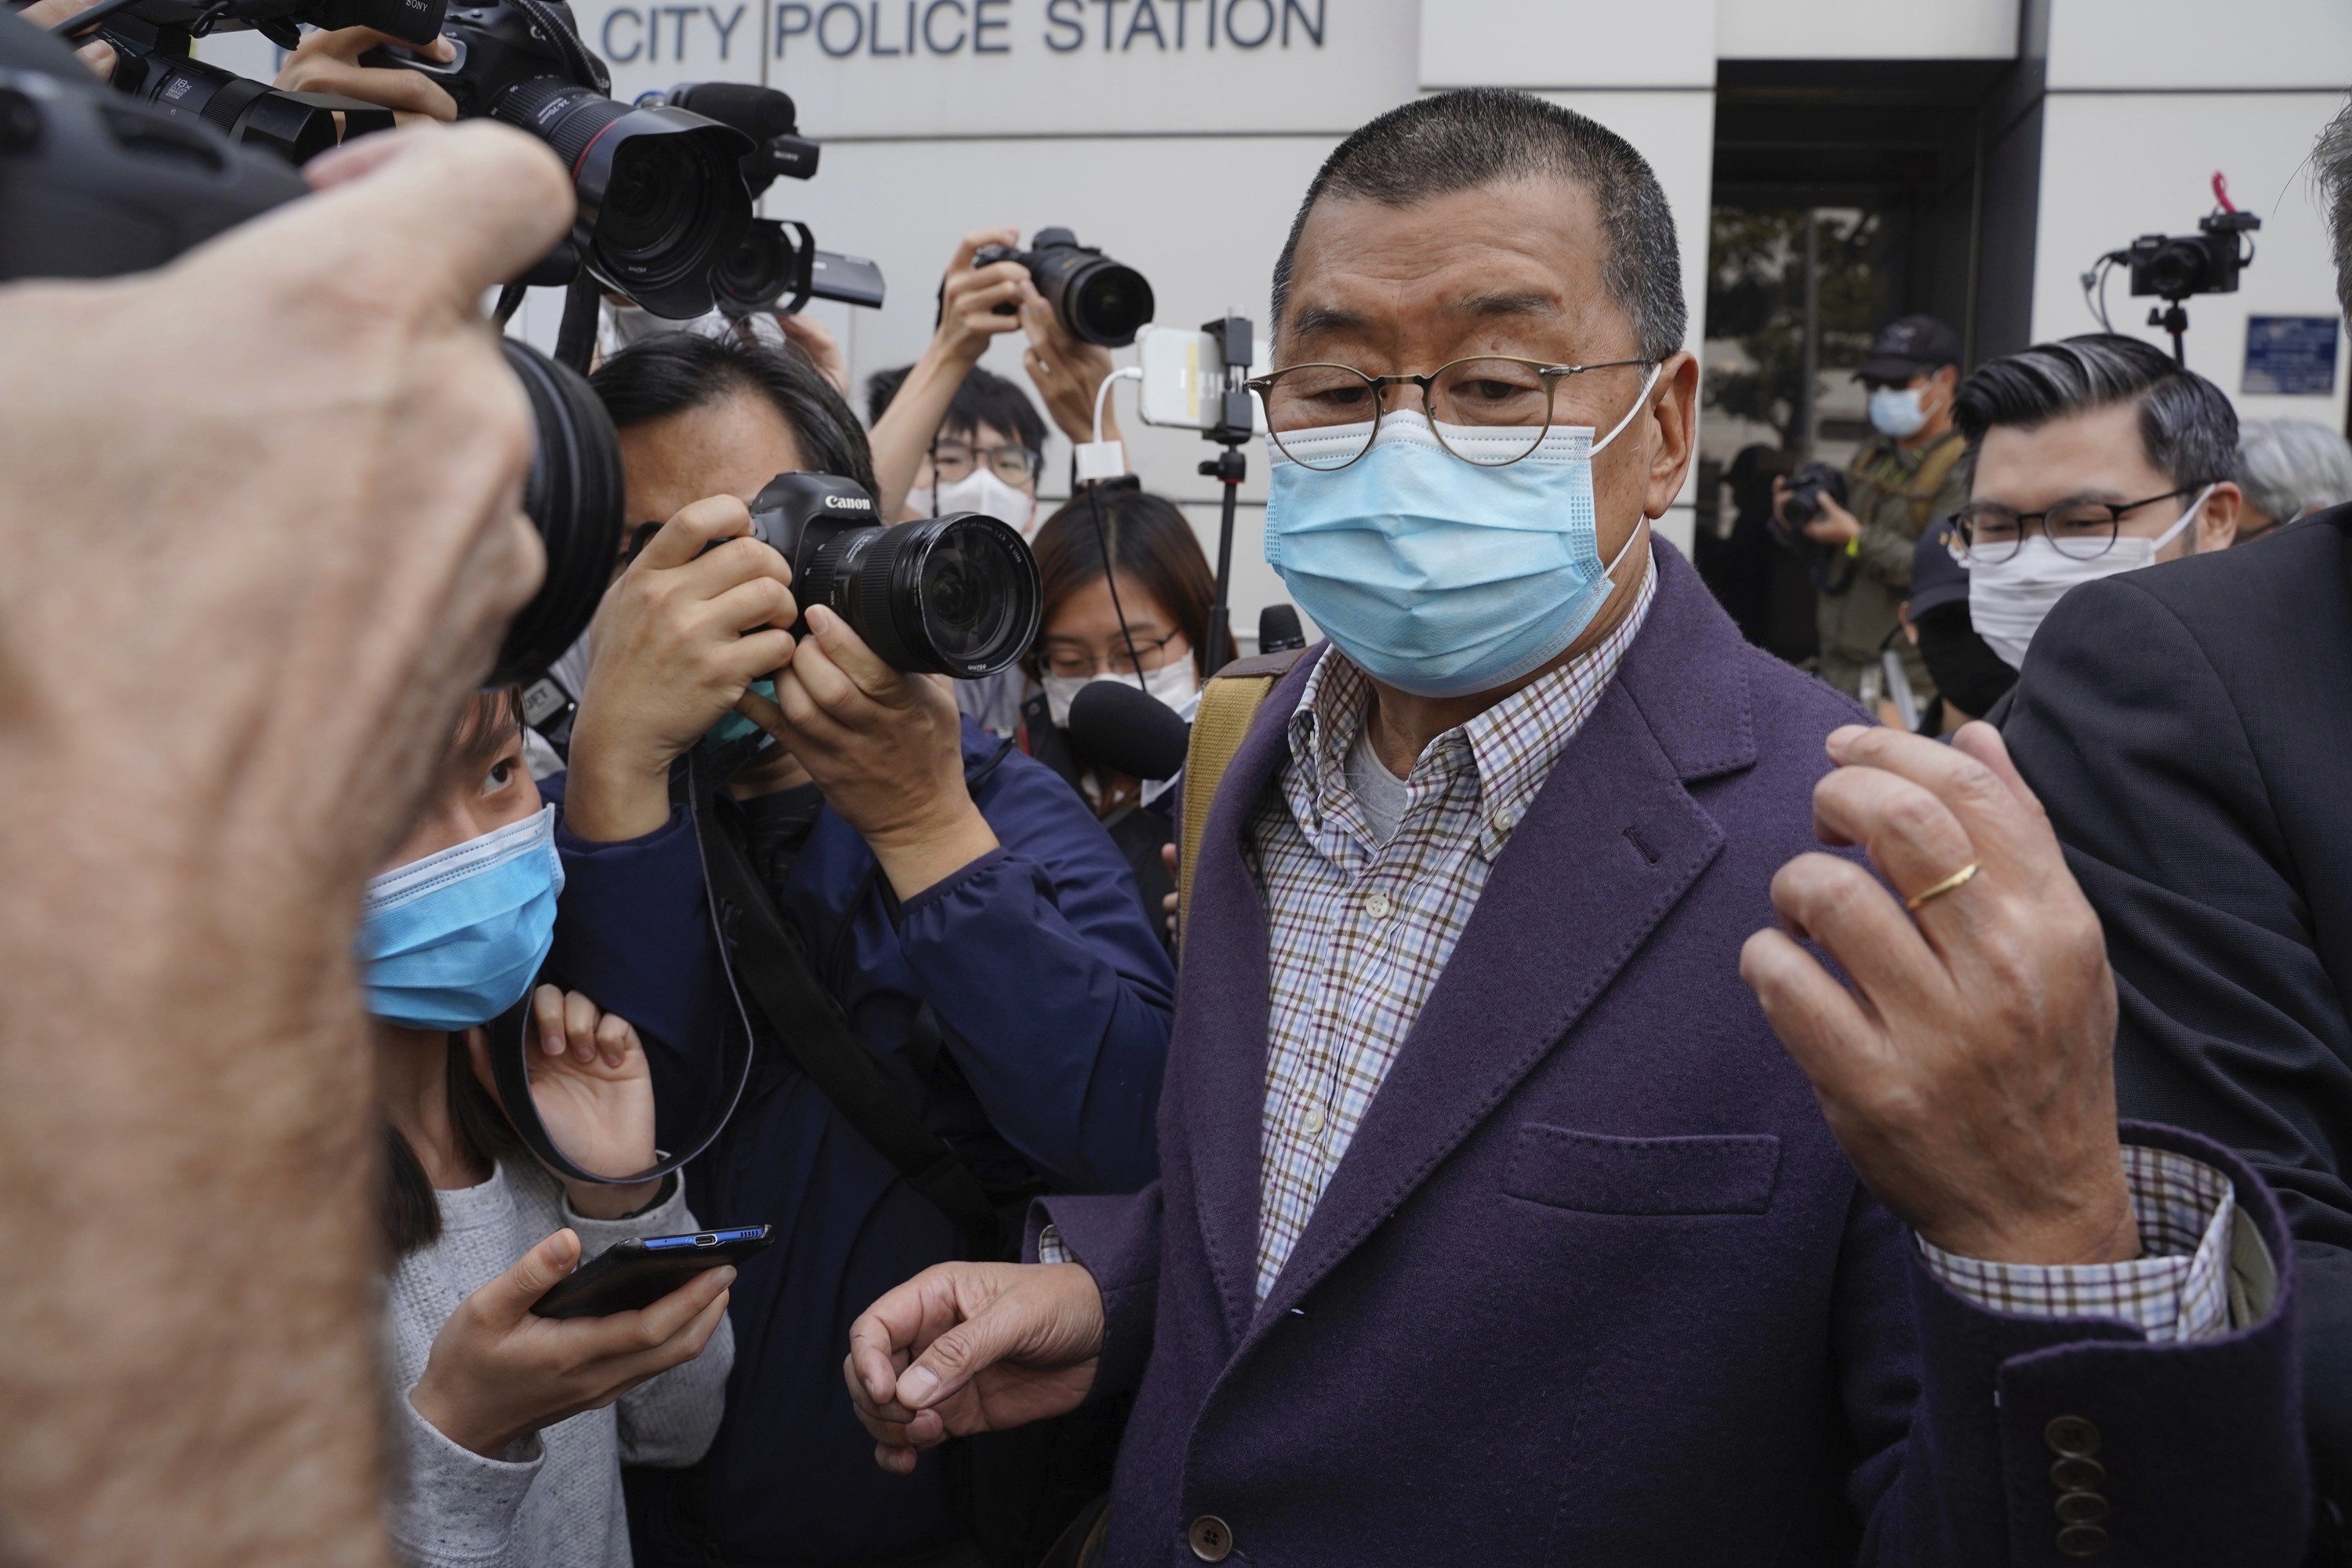 Apple Daily founder Jimmy Lai is released from a police station on bail on February 28. Photo: AP